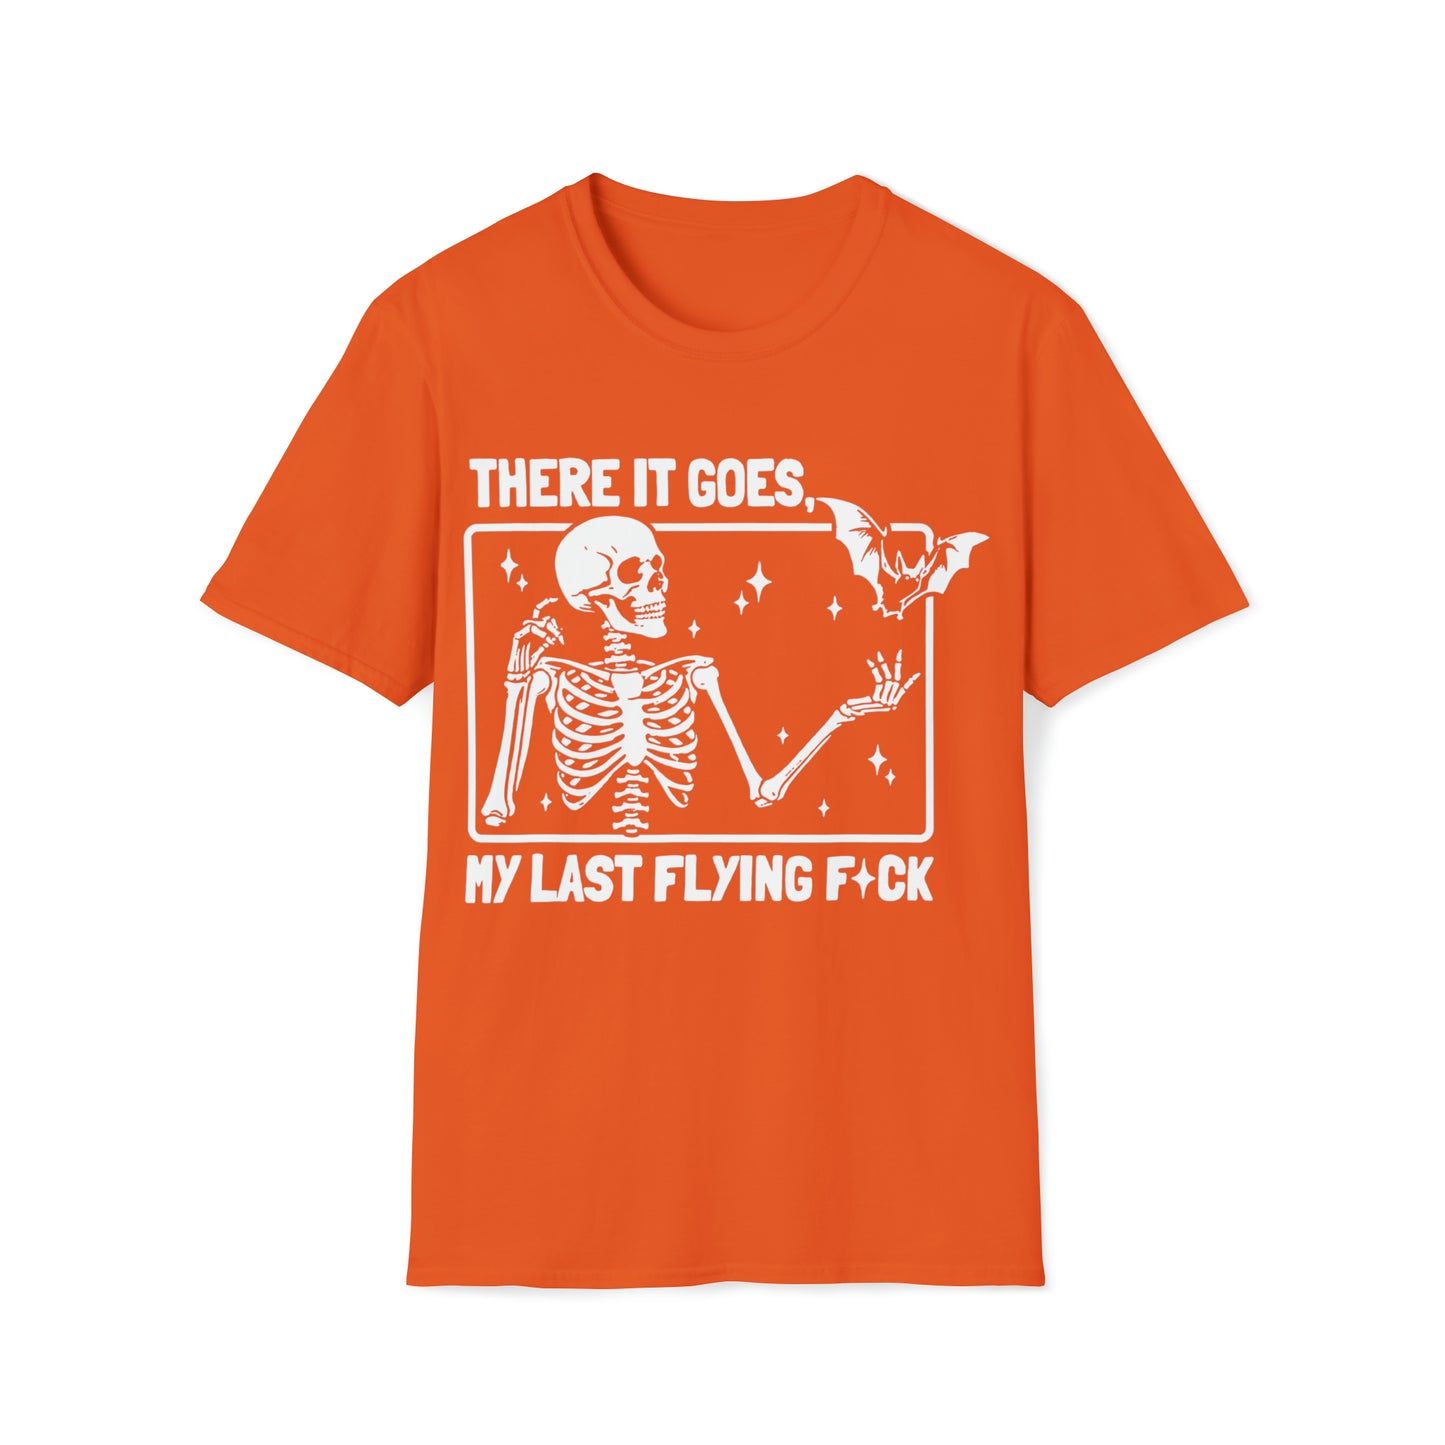 There is goes, my last flying F*ck Unisex Softstyle T-Shirt